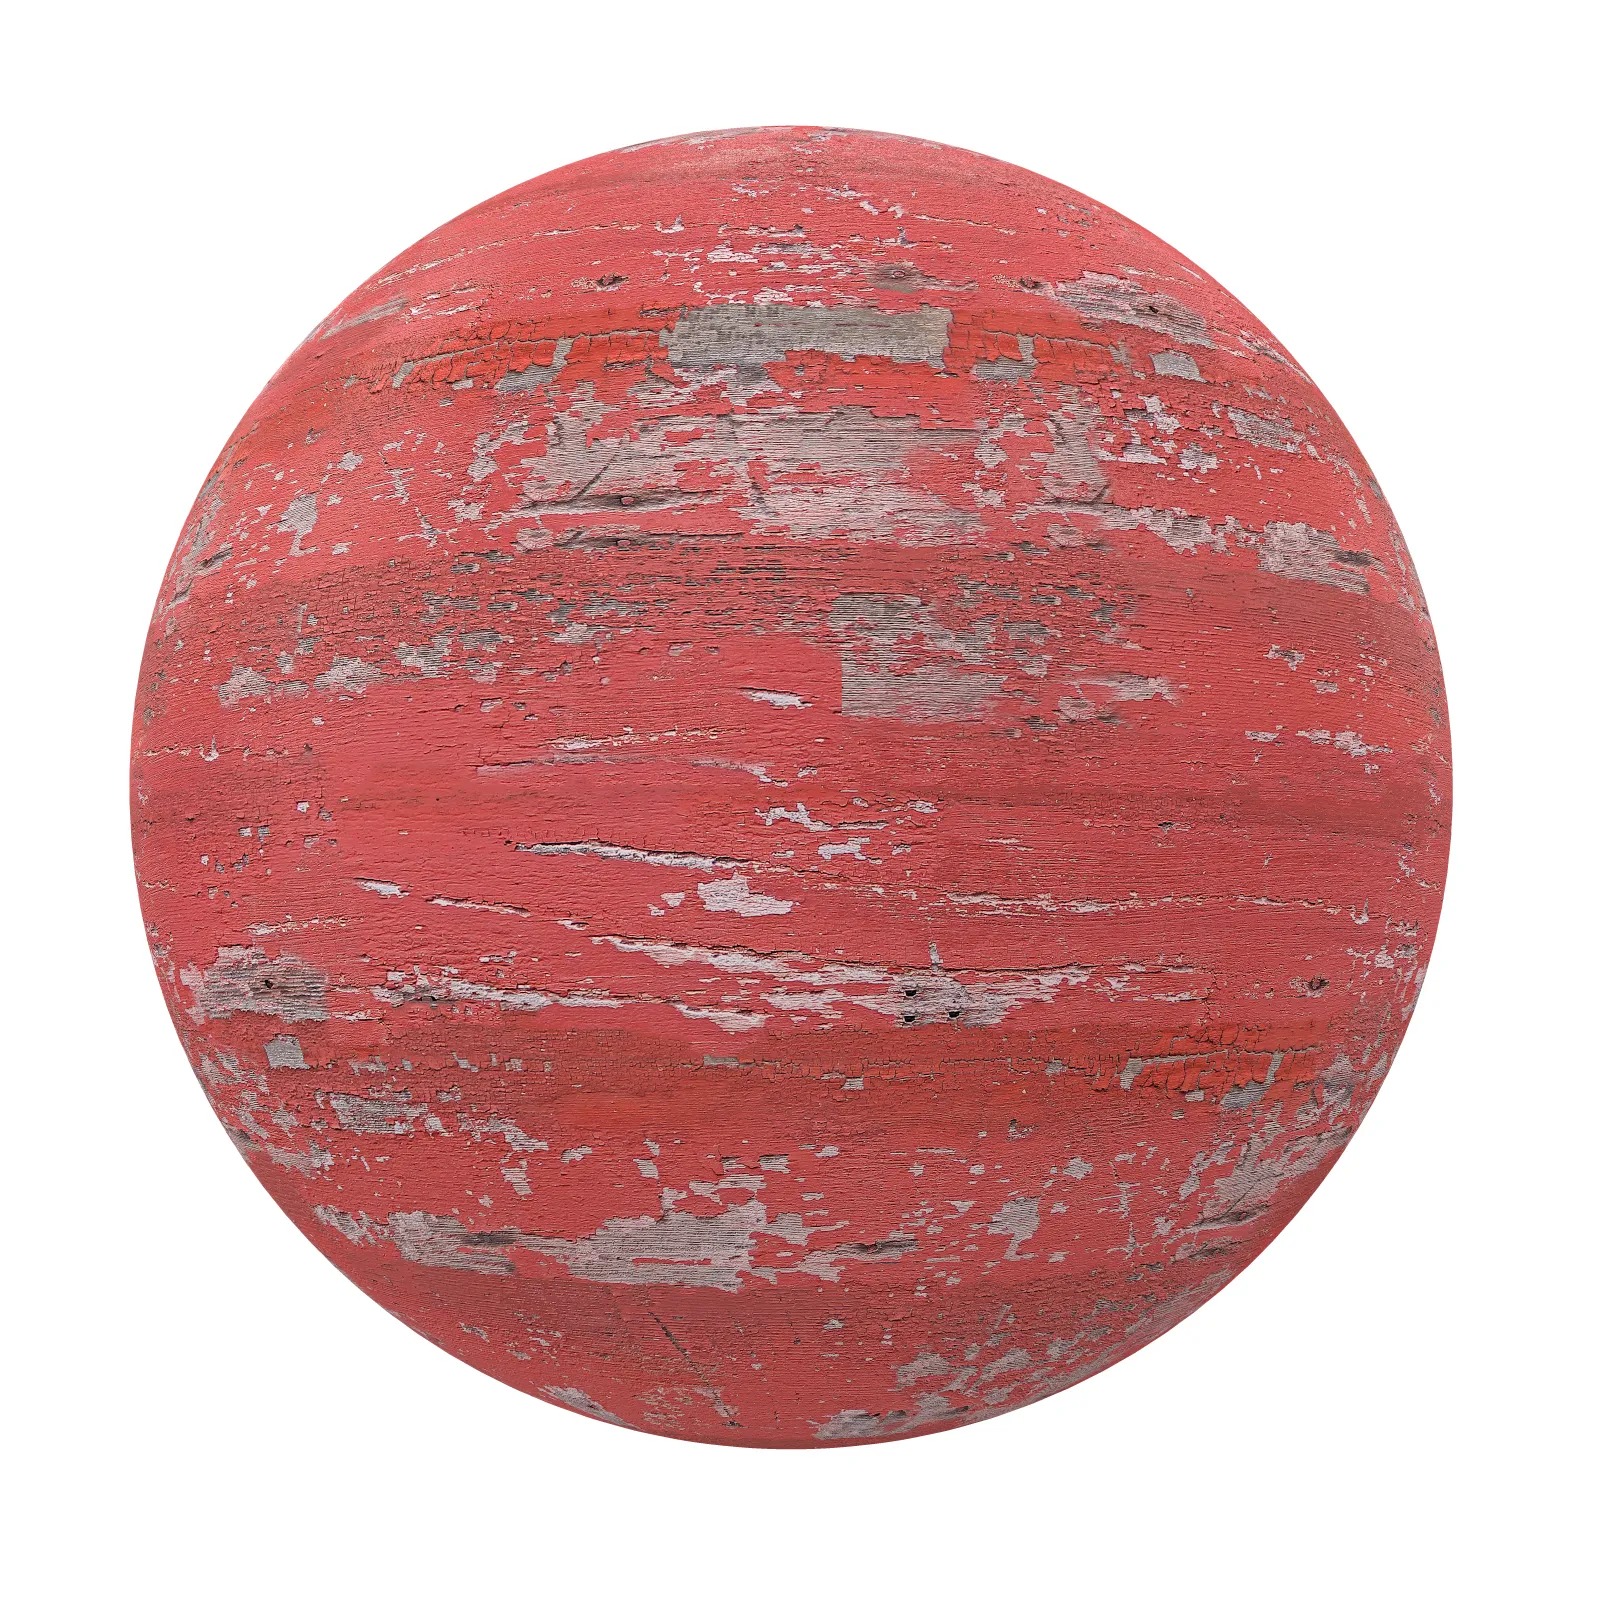 TEXTURES – WOOD – Red Painted Wood 1